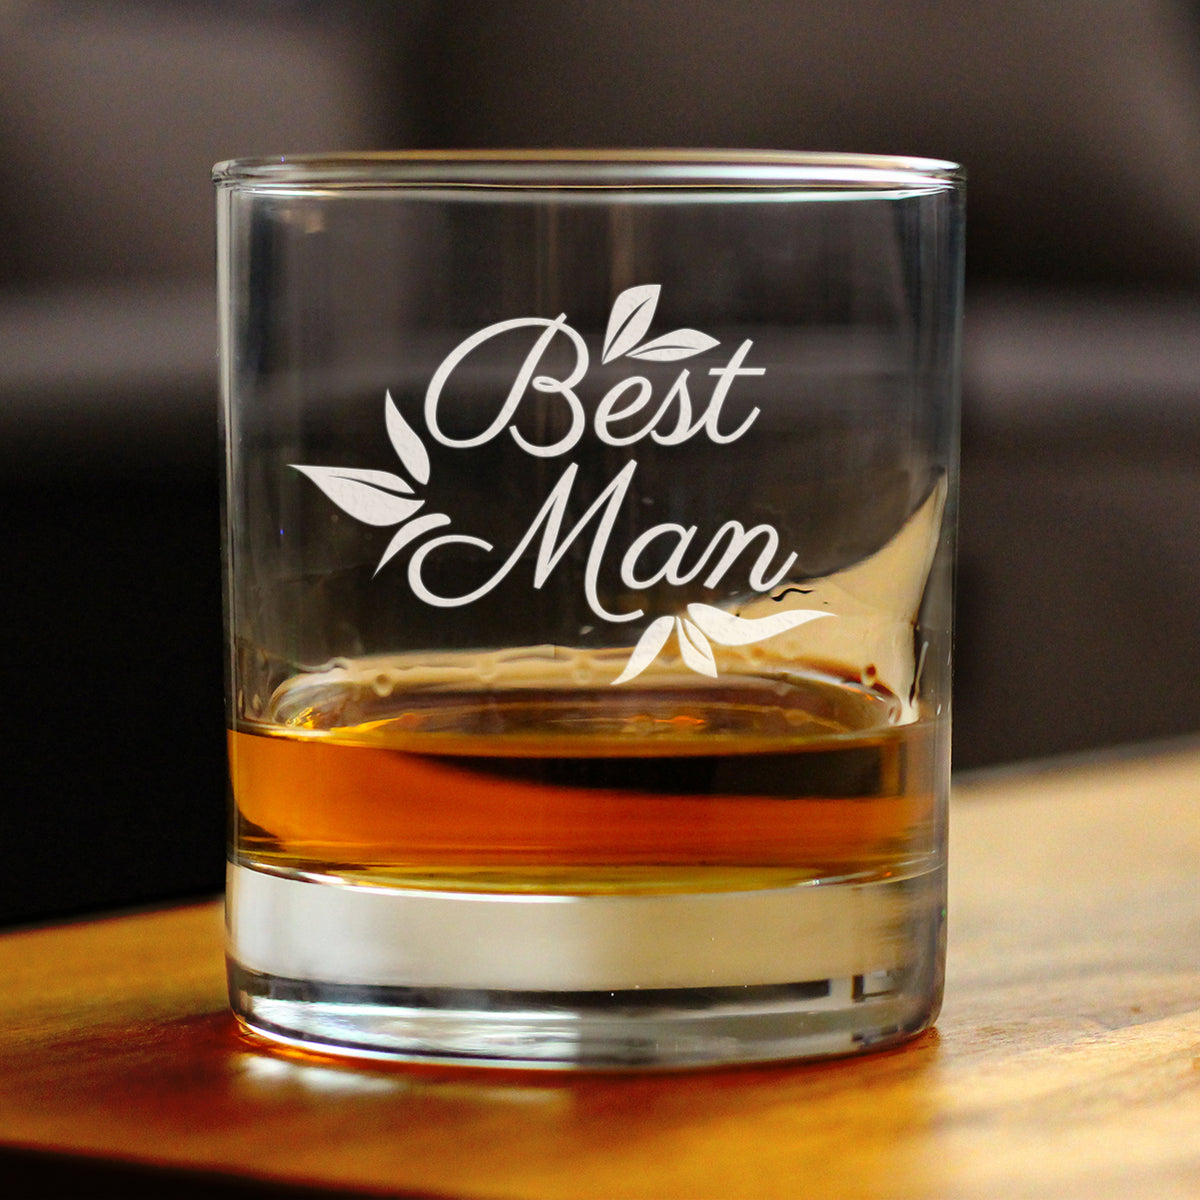 Best Man Old Fashioned Rocks Glass - Groomsmen Proposal Gifts - Unique Engraved Wedding Cup Gift